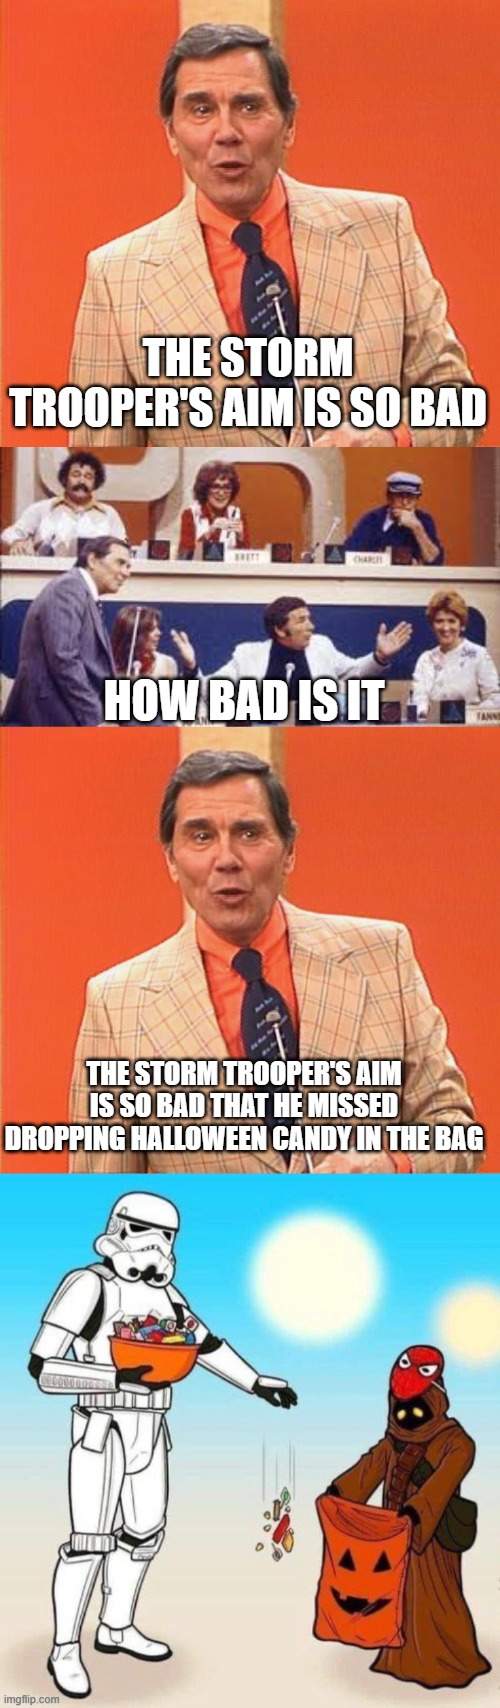 Starwars bad aim | THE STORM TROOPER'S AIM IS SO BAD; HOW BAD IS IT; THE STORM TROOPER'S AIM IS SO BAD THAT HE MISSED DROPPING HALLOWEEN CANDY IN THE BAG | image tagged in gene rayburn,match game,star wars | made w/ Imgflip meme maker